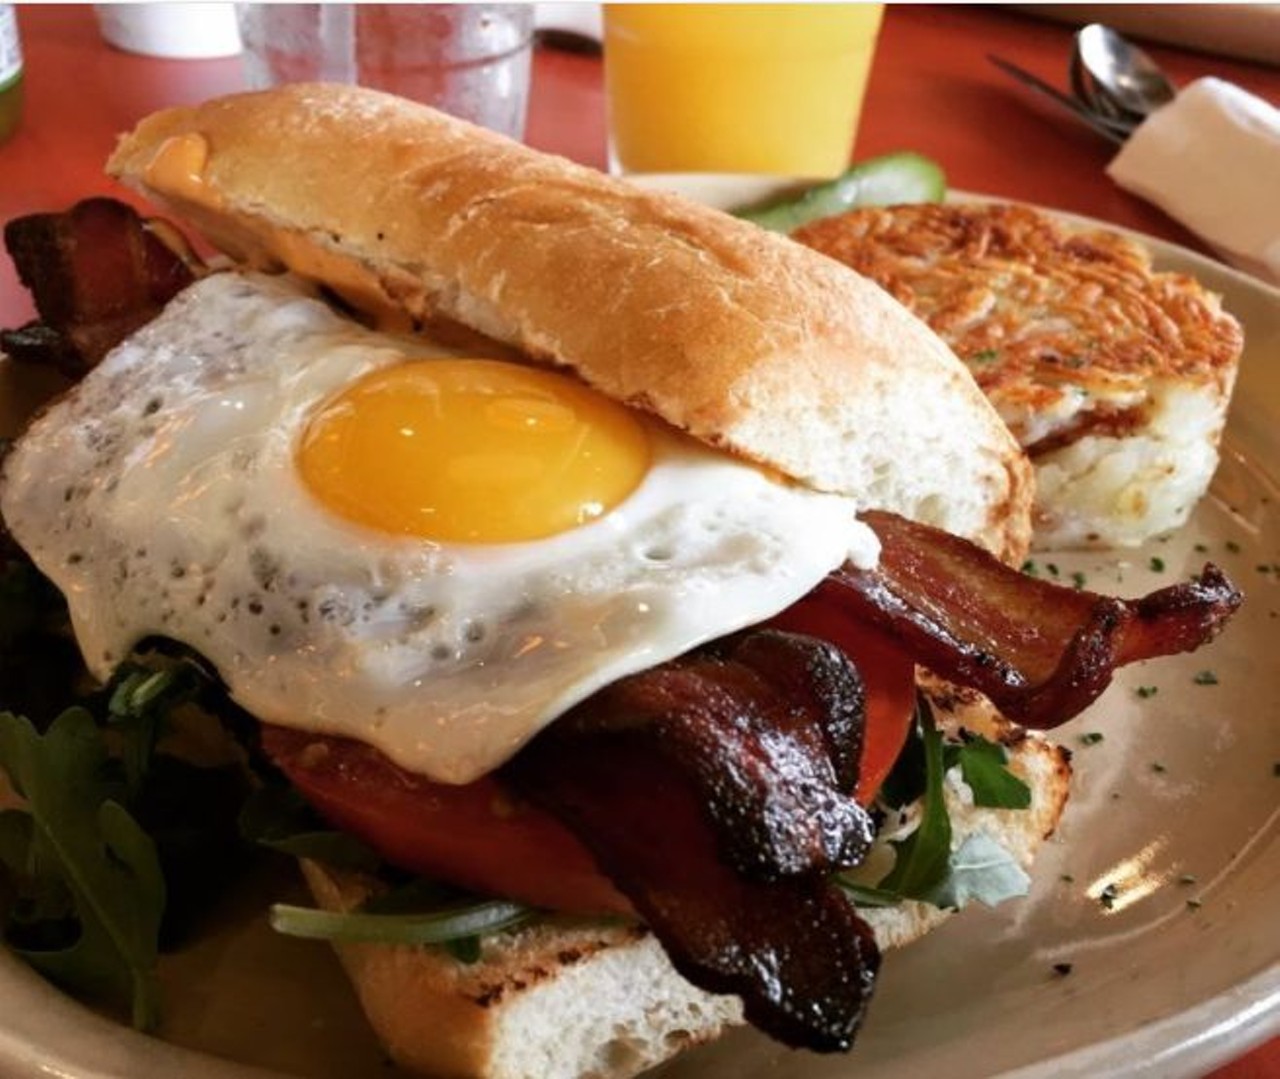 Snooze
255 E. Basse Rd. Suite 160, (210) 937-1063, snoozeeatery.com
The Denver-based, all-breakfast-foods-all-the-time chain, will opened its doors March 1 inside the former EZ's Brick Oven and Grill at The Quarry. With menu items that such as breakfast pot pie and pineapple upside down pancakes, this place has easily become a favorite among San Antonians.
Photo via Instagram,  beyonndblessed